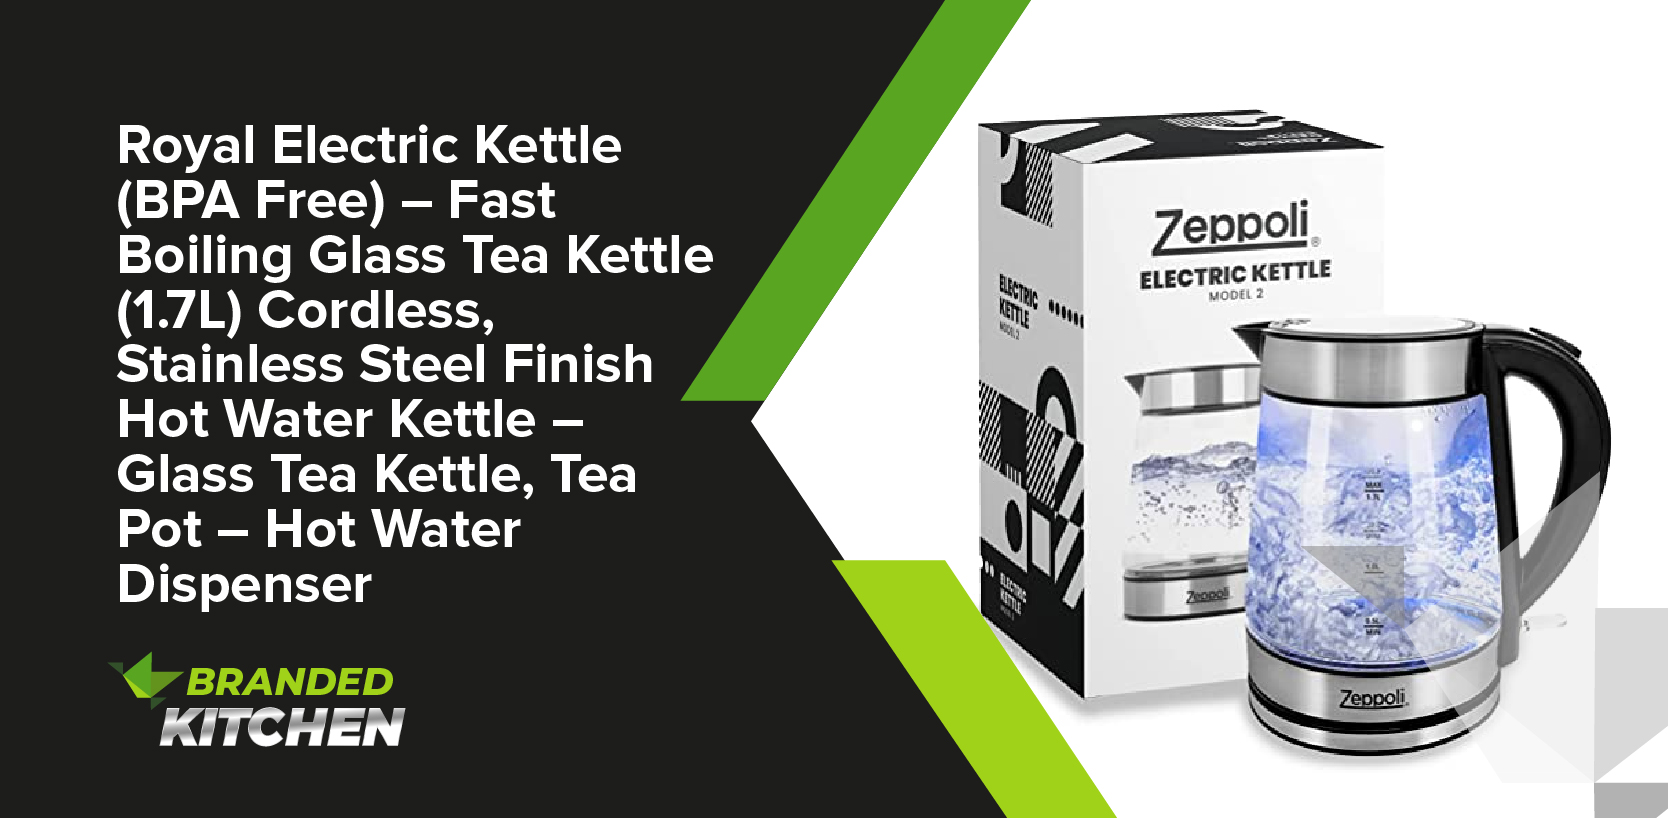 Royal Electric Kettle (BPA Free) – Fast Boiling Glass Tea Kettle (1.7L) Cordless, Stainless Steel Finish Hot Water Kettle – Glass Tea Kettle, Tea Pot – Hot Water Dispenser